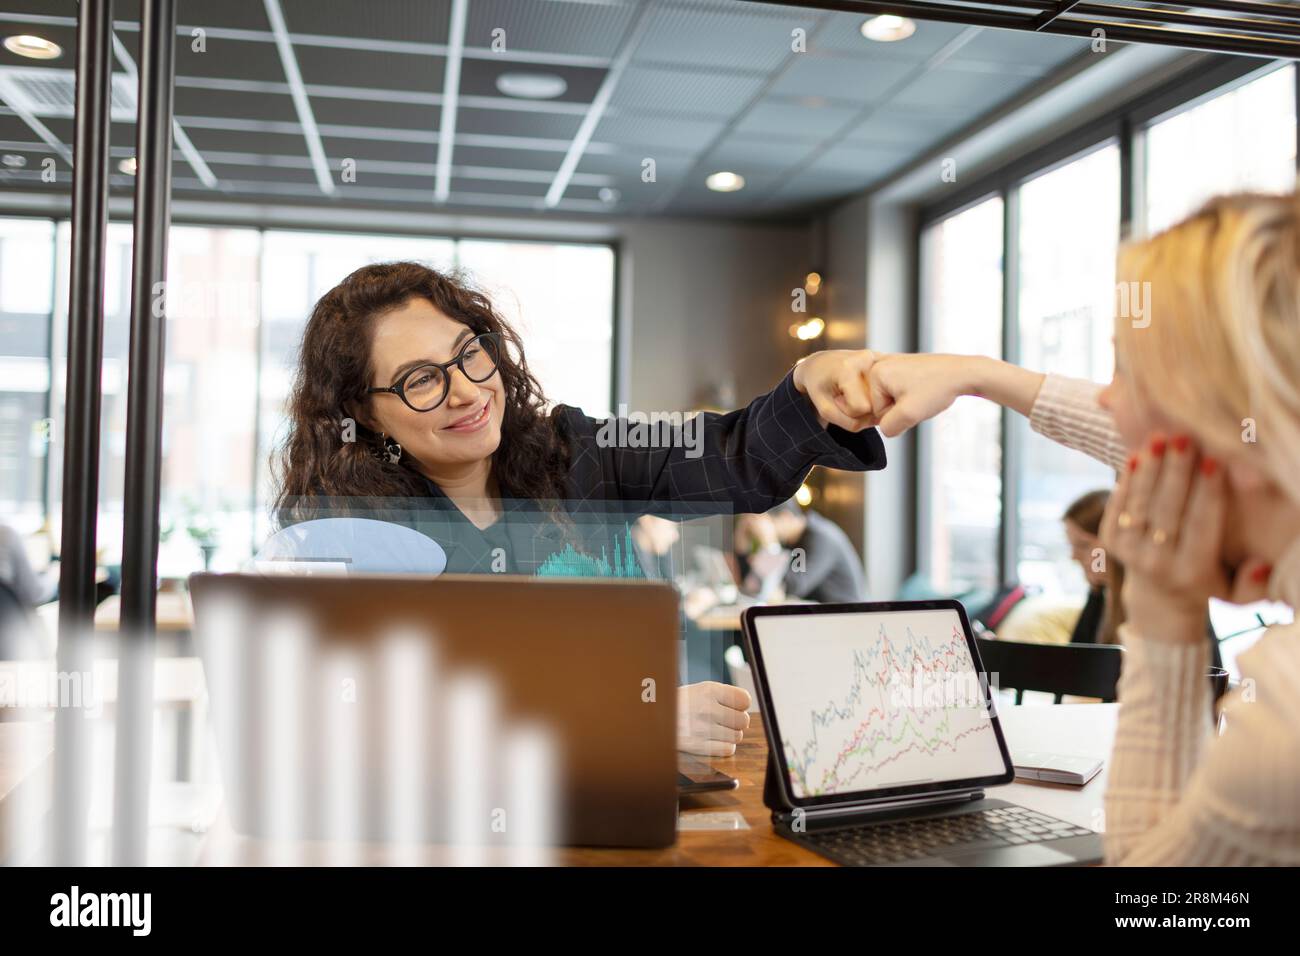 Smiling woman giving fist bump to colleagues in office Stock Photo